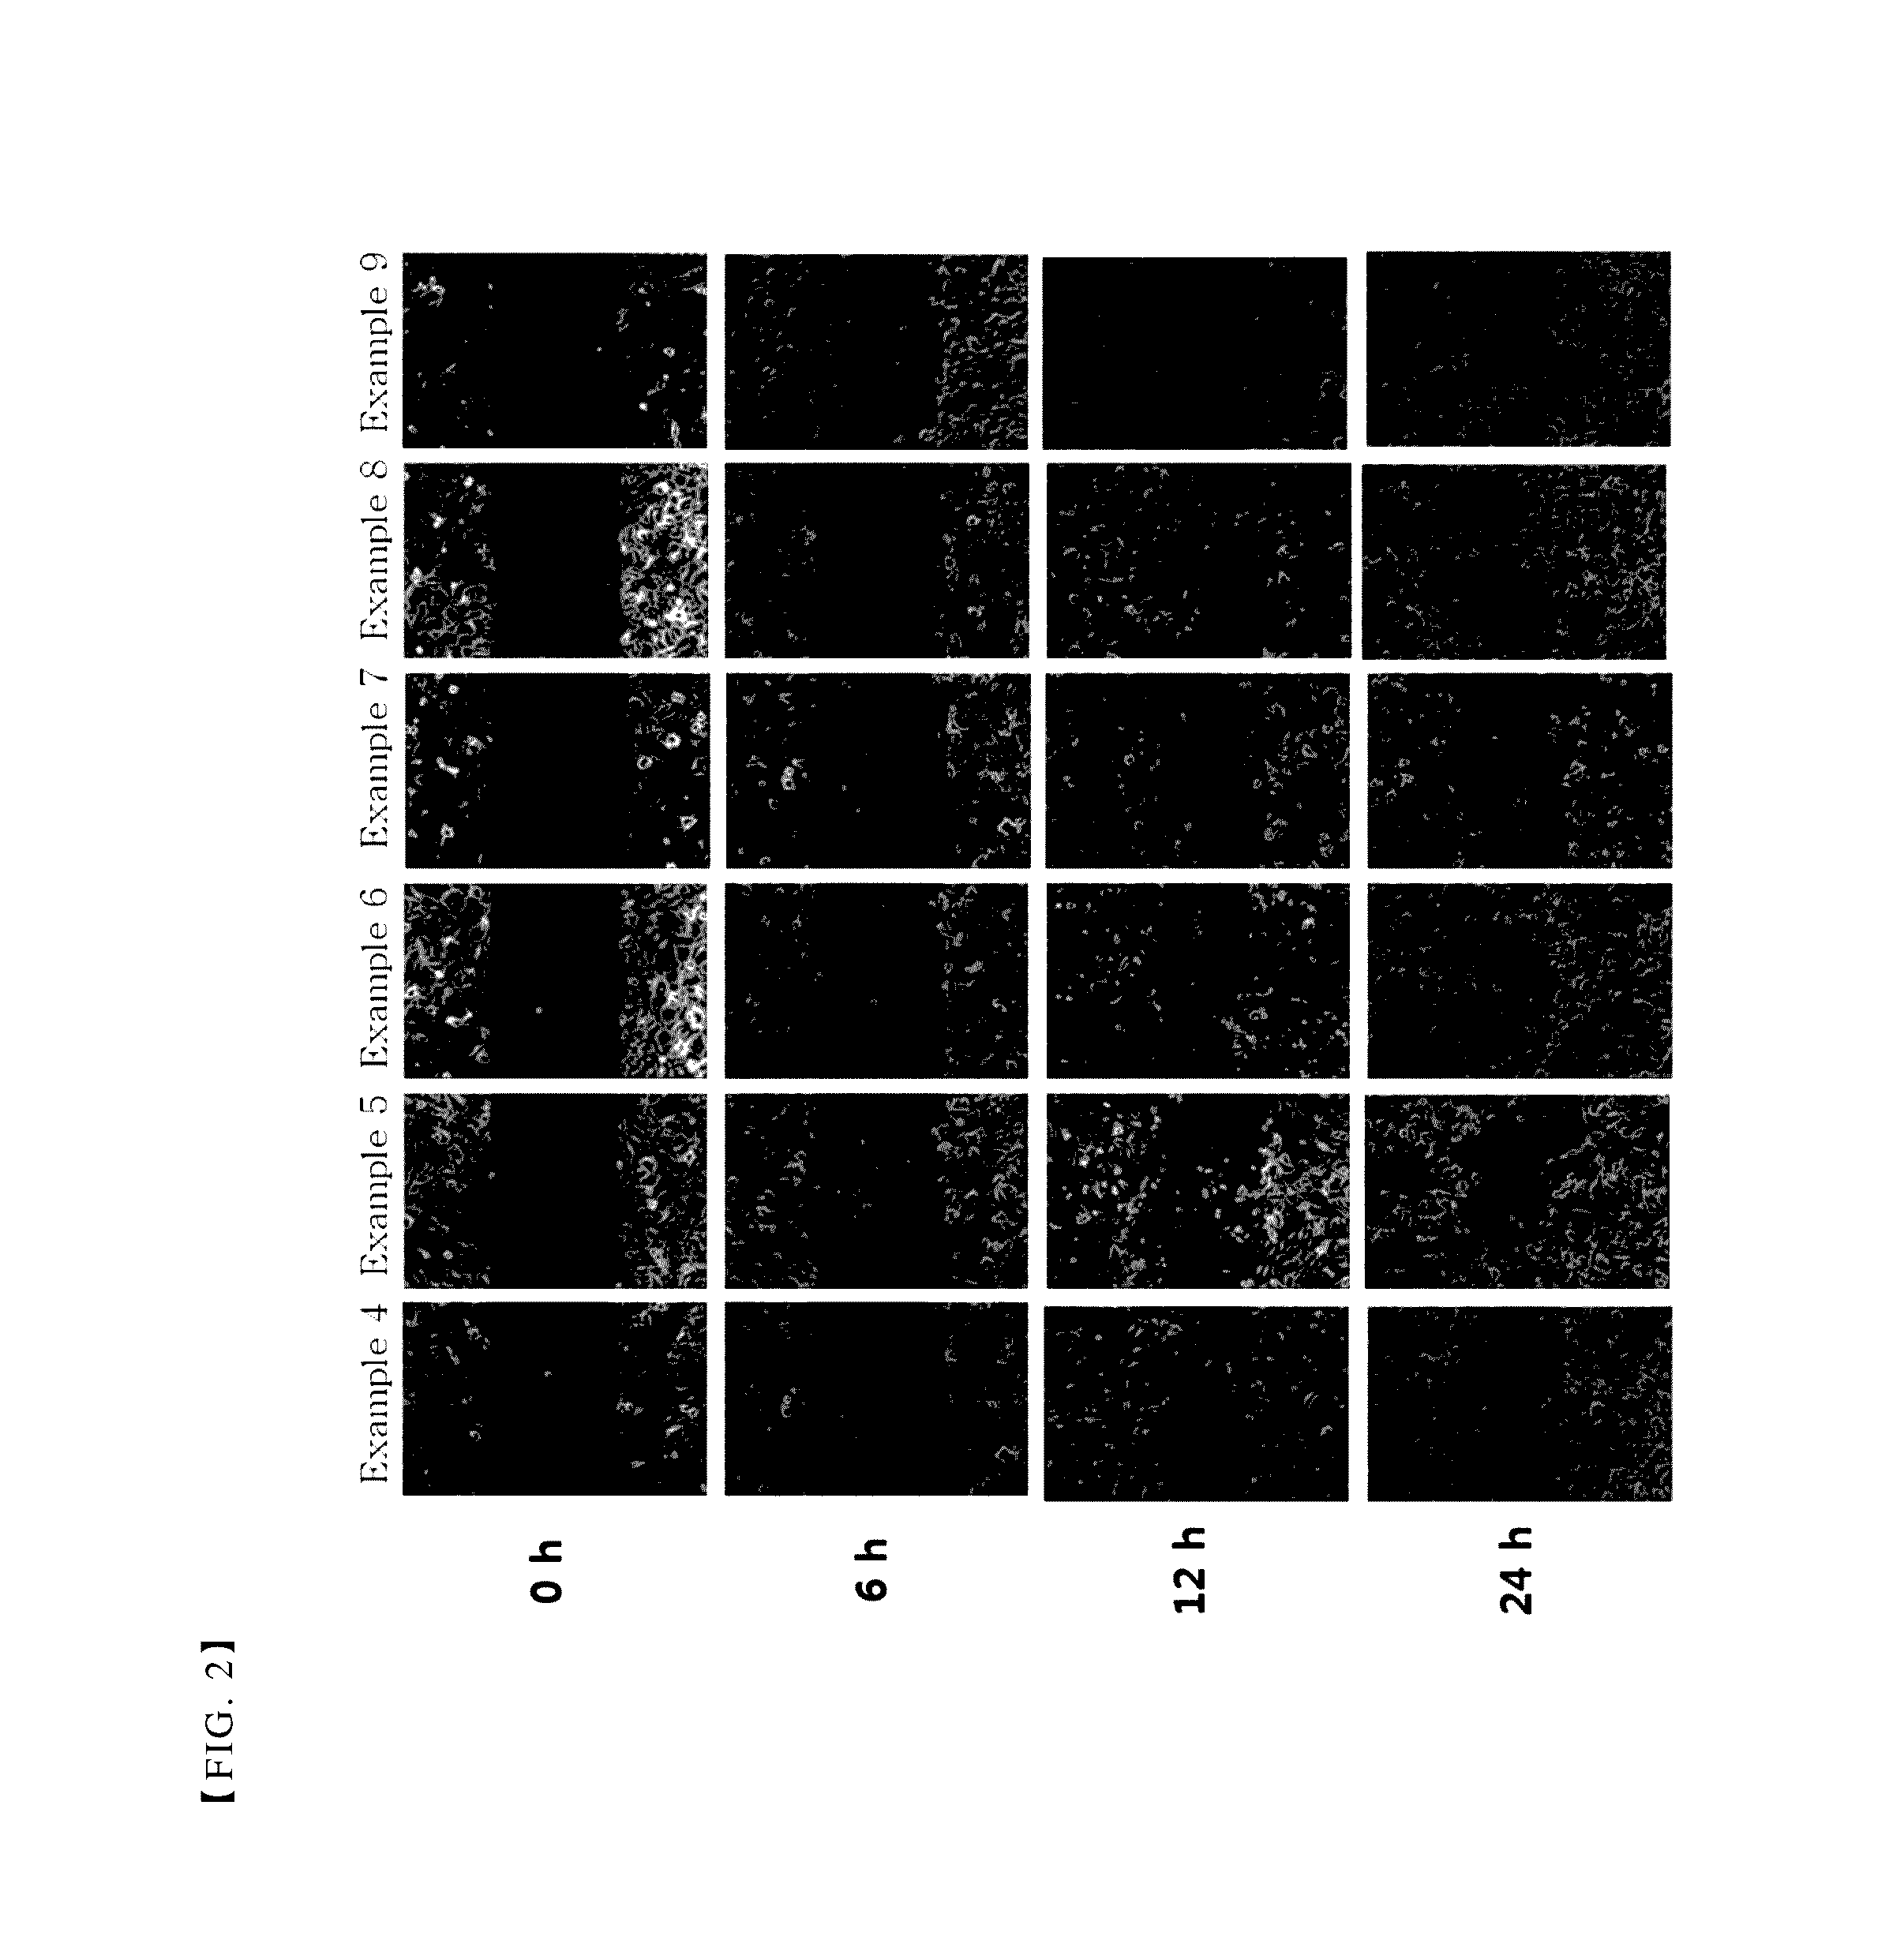 Pharmaceutical composition for treating or preventing corneal wound comprising thymosin beta 4 and citric acid